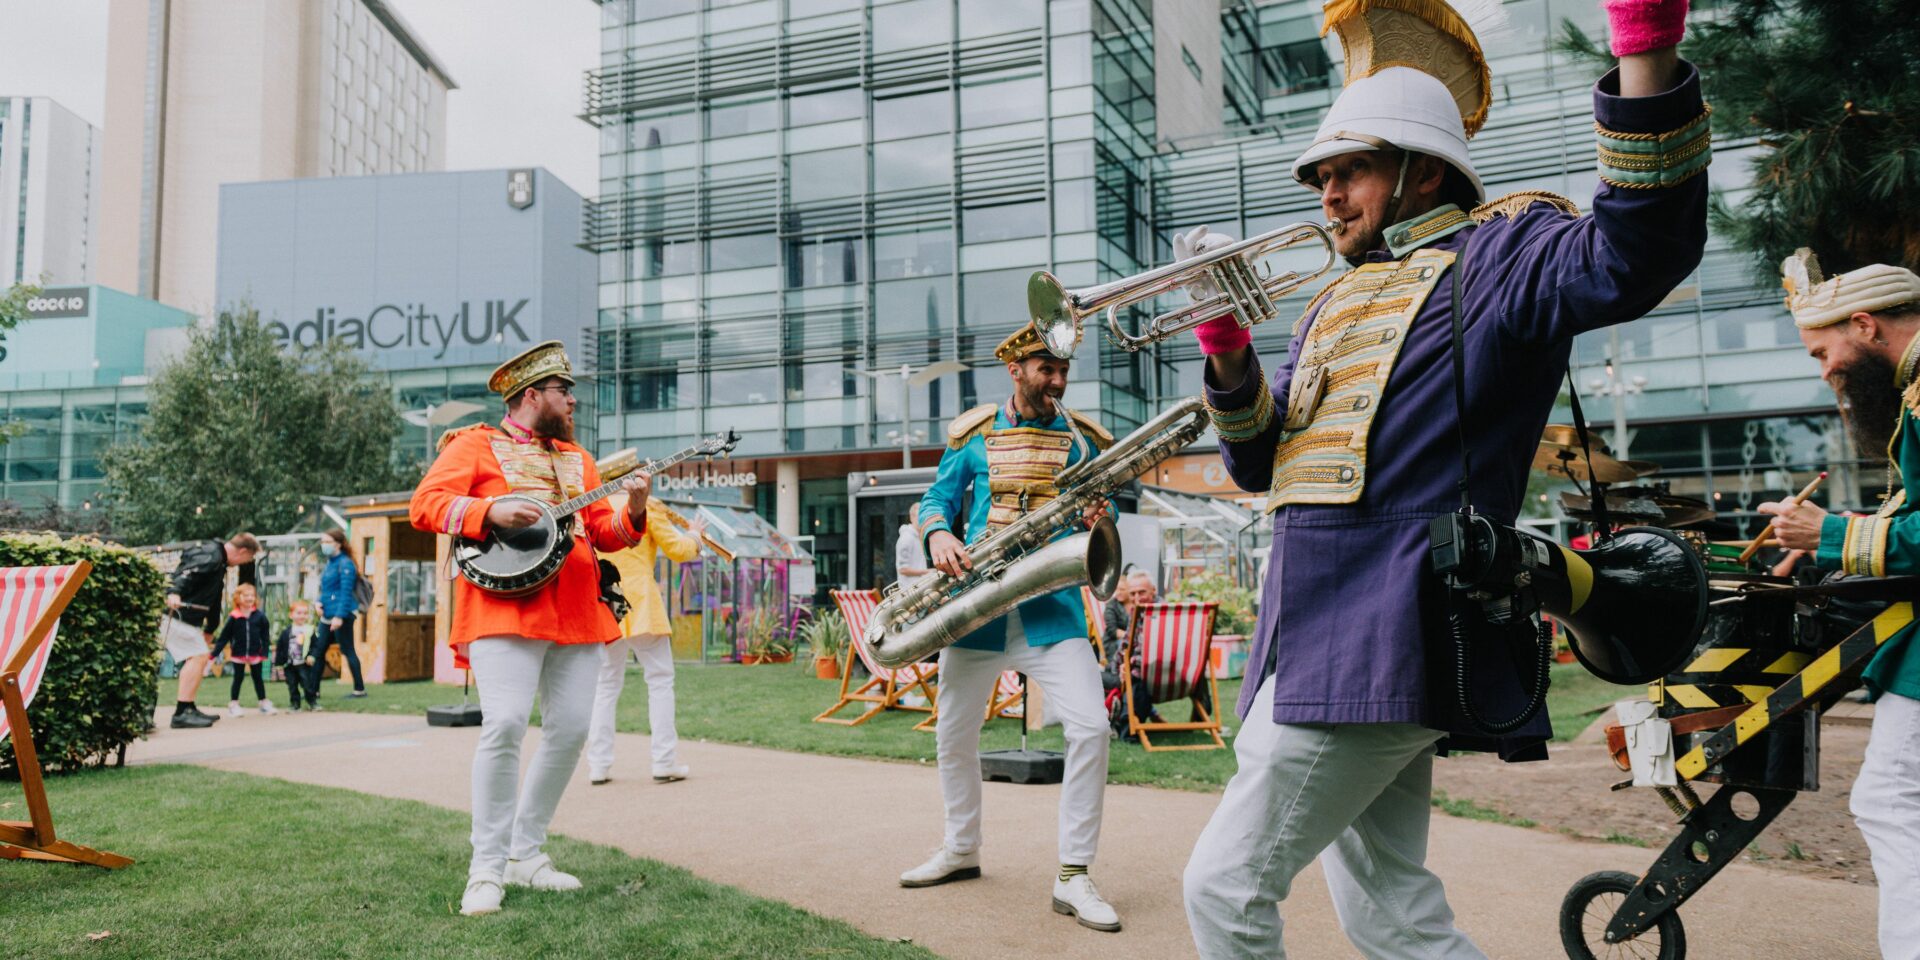 band members playing on the grass at mediacity